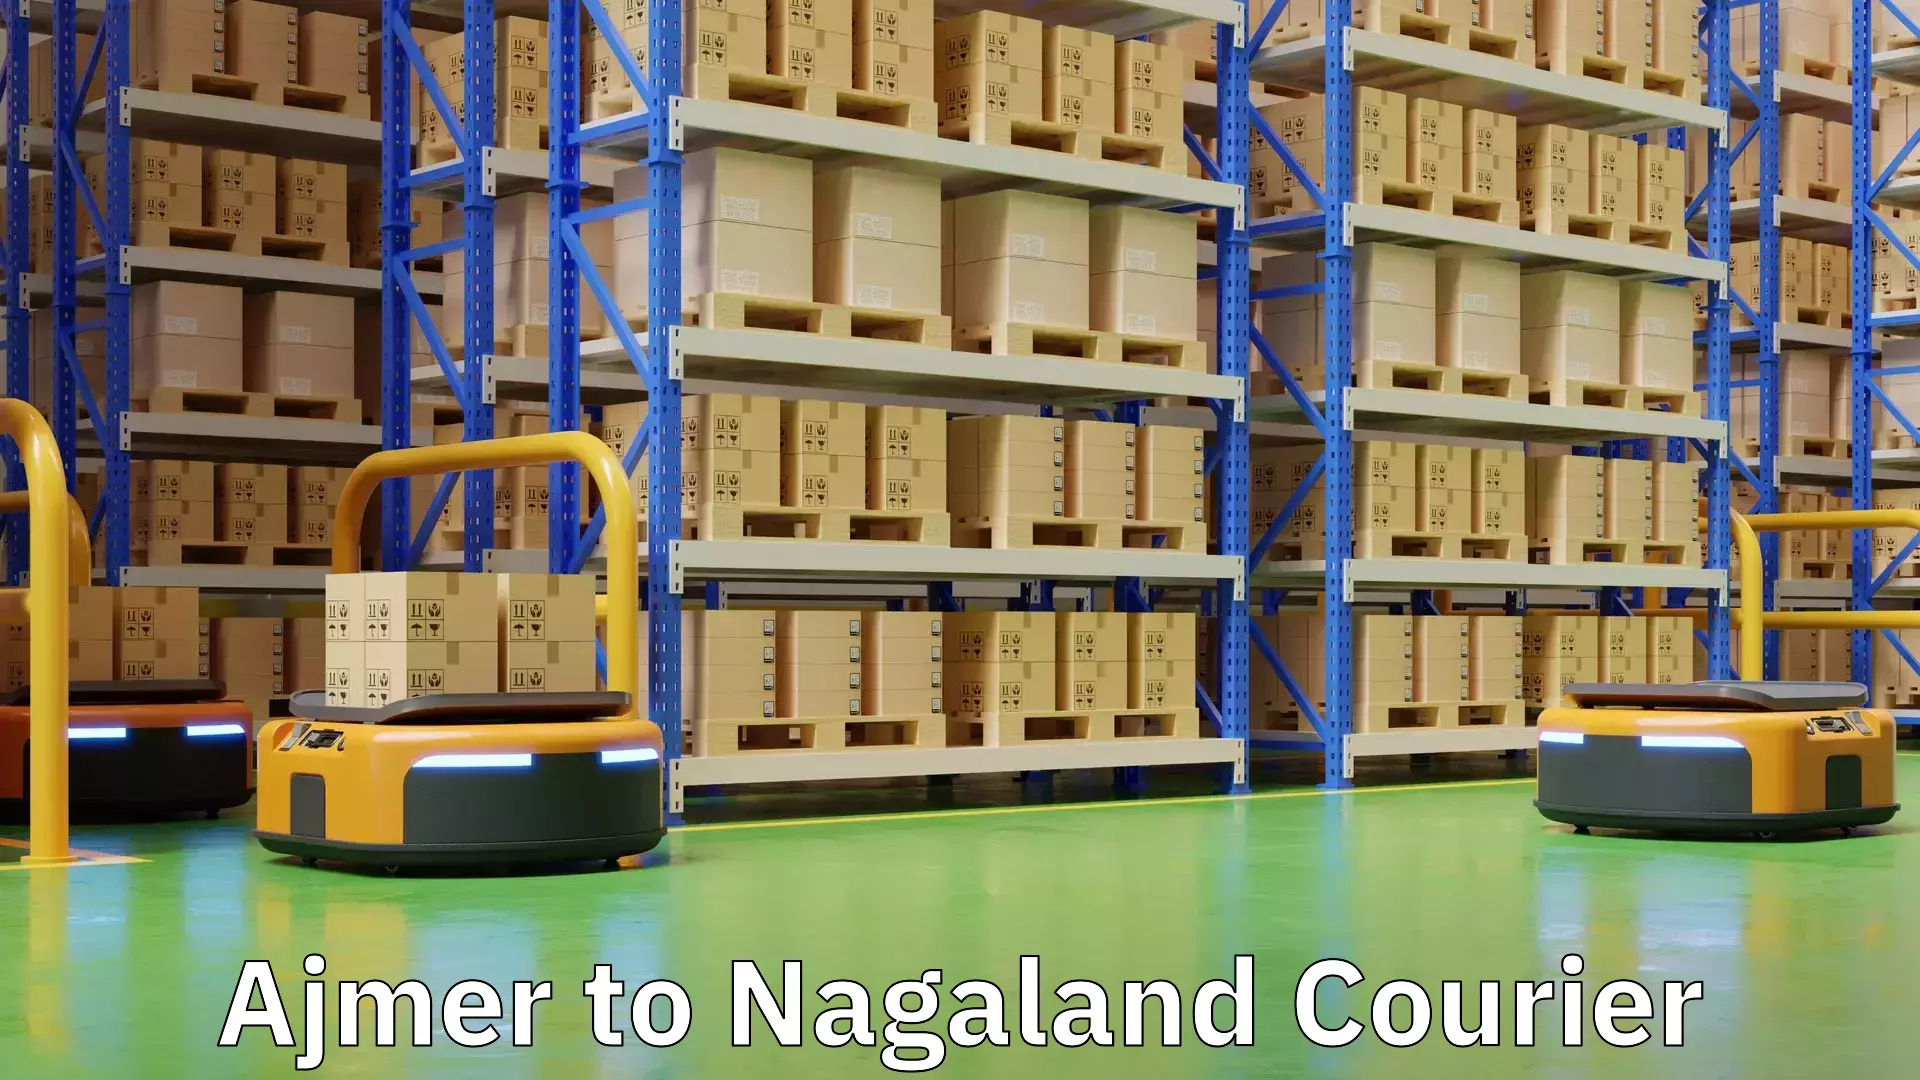 Global shipping solutions Ajmer to Nagaland